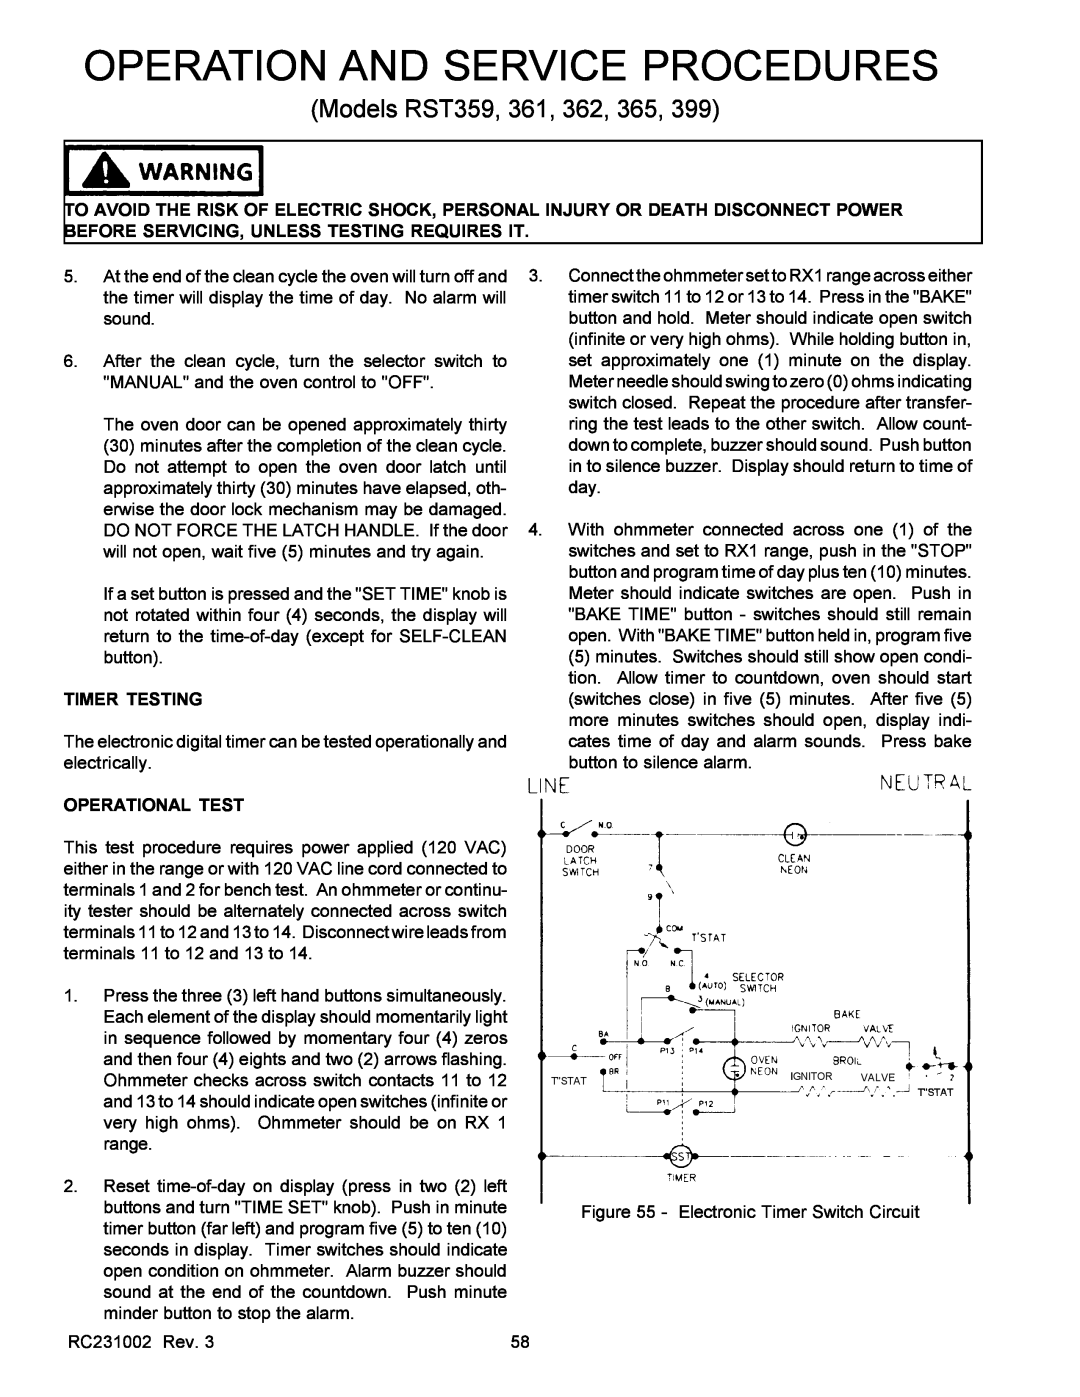 Amana RSS service manual Timer Testing, Operational Test, Operation And Service Procedures, Models RST359, 361, 362, 365 